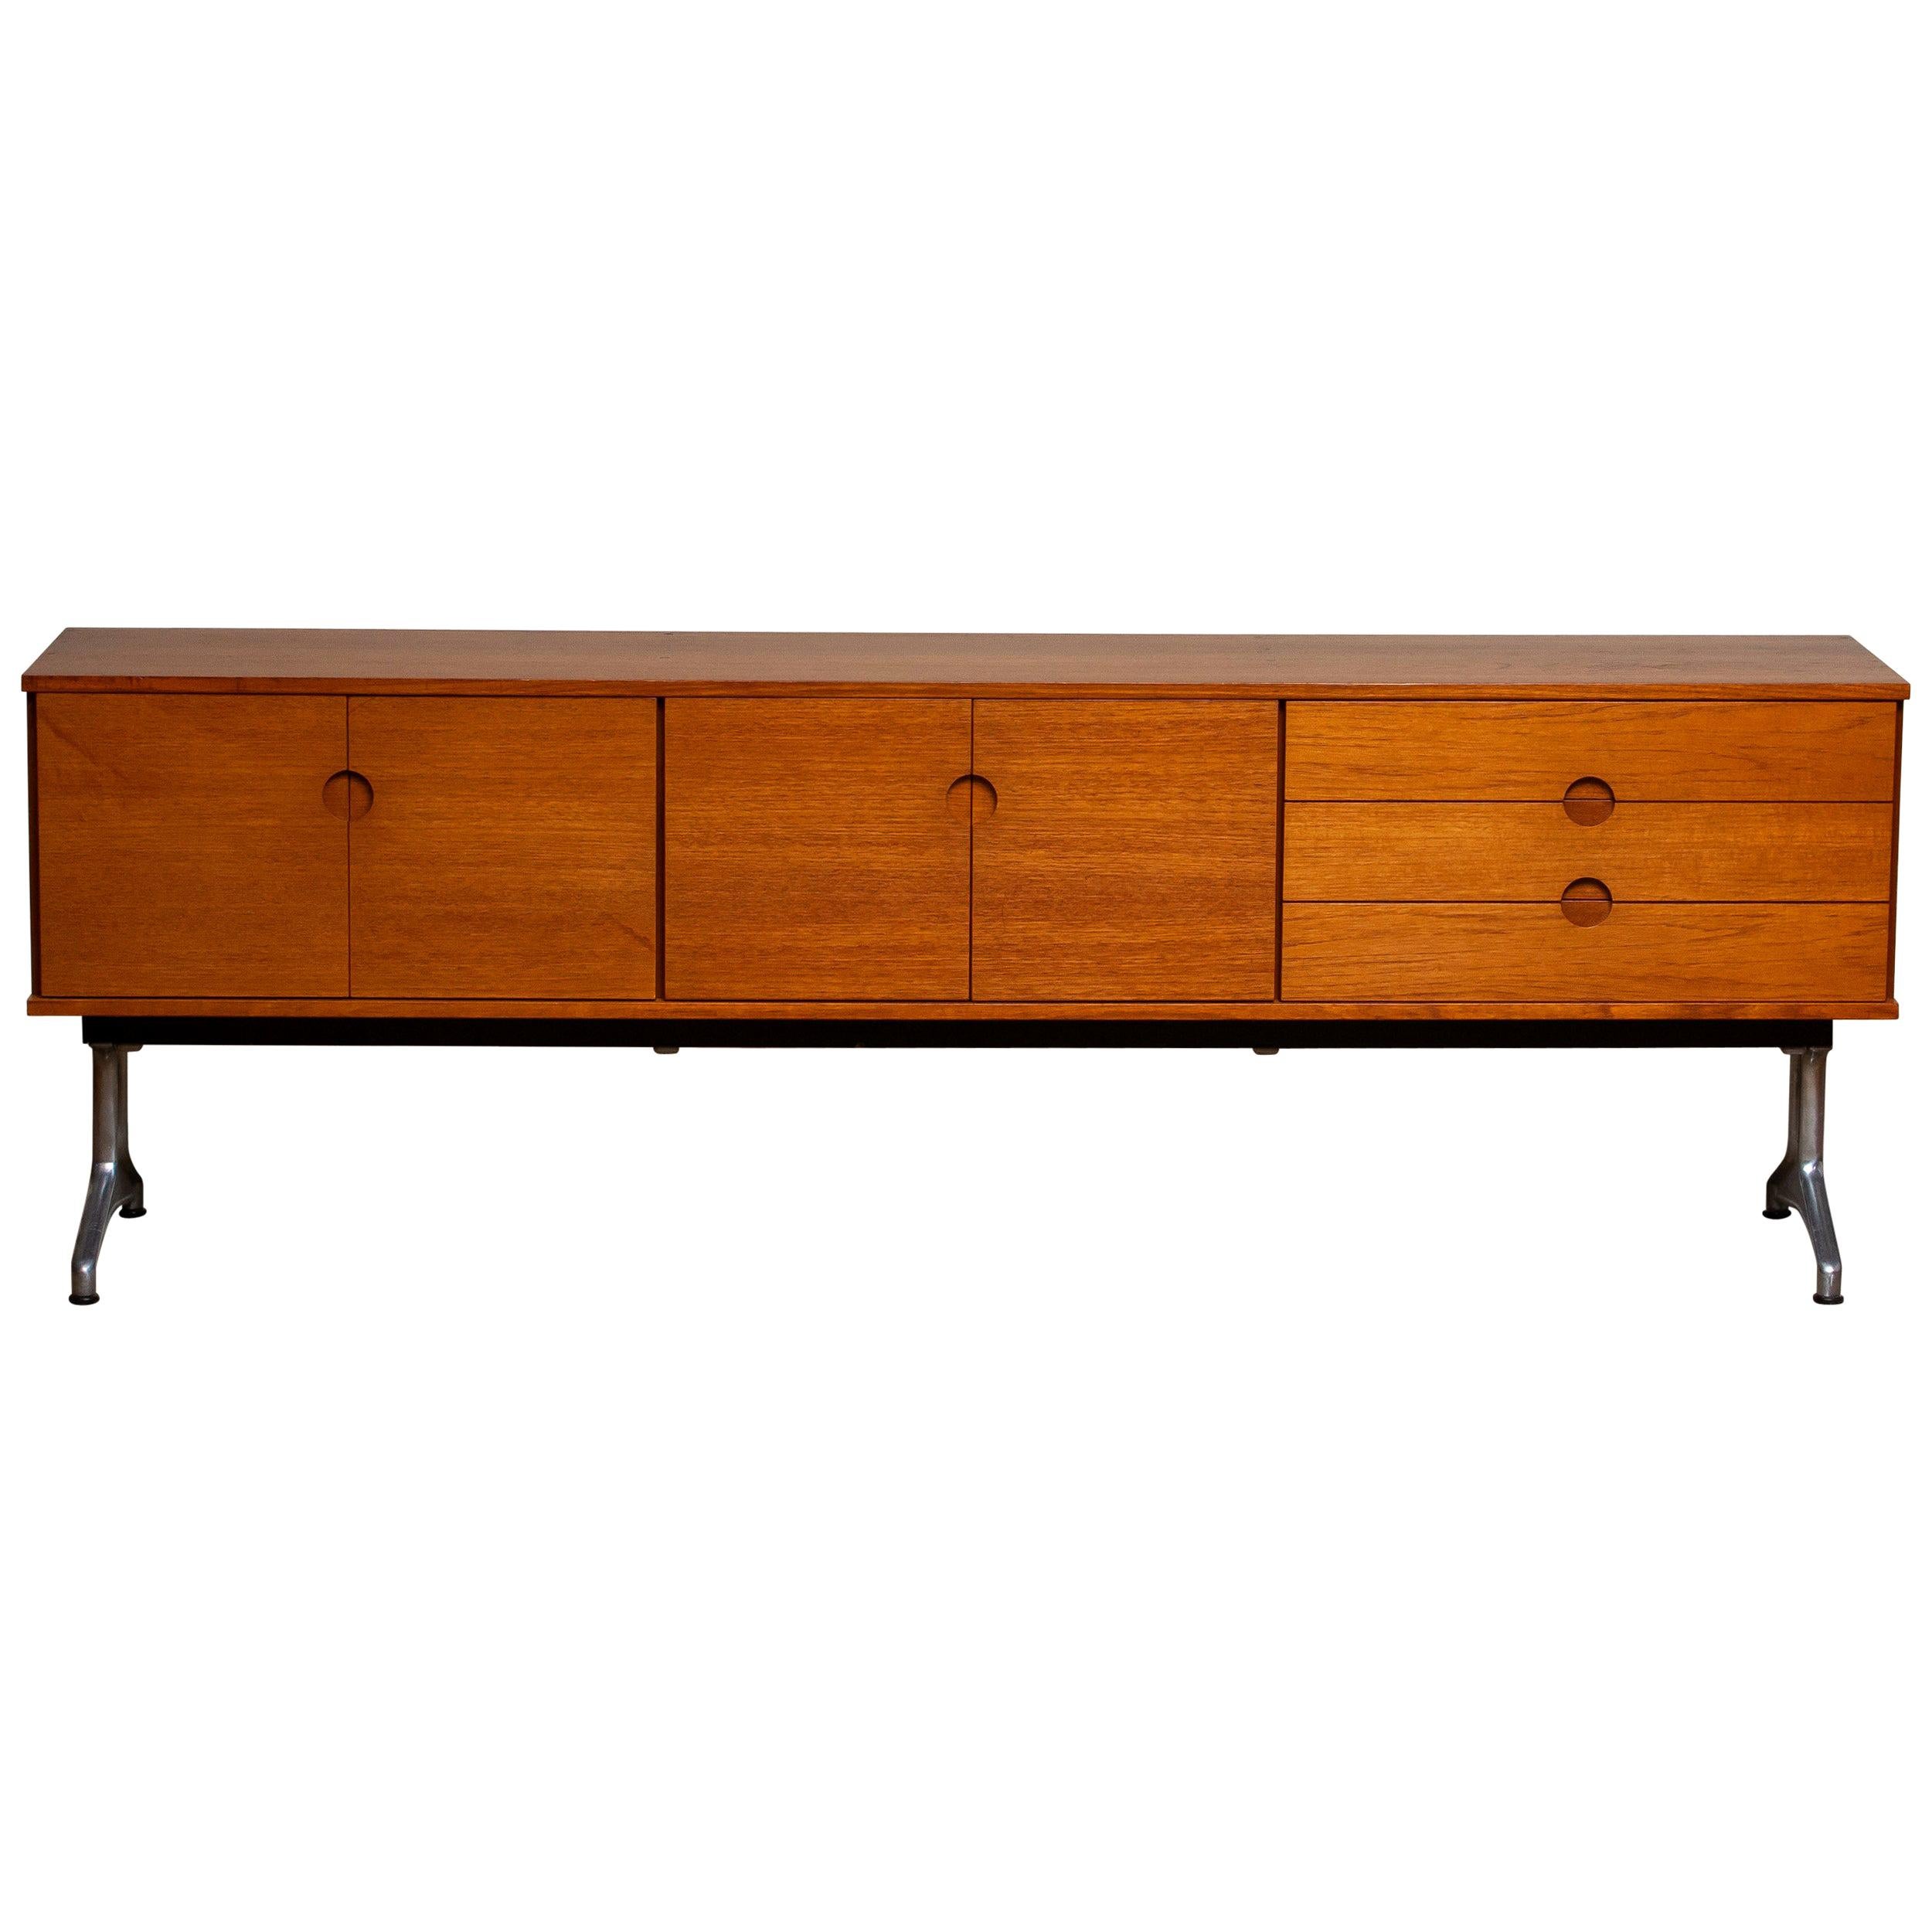 Beautiful Norwegian sideboard / credenzas designed in the 1960s by Pertti Salmi for Vilka Oy in Nastola Soumi, Norway. Consists three drawers and four doors. In both internal cabinets is a removable shelf.
Very nice detail are the milled handles in